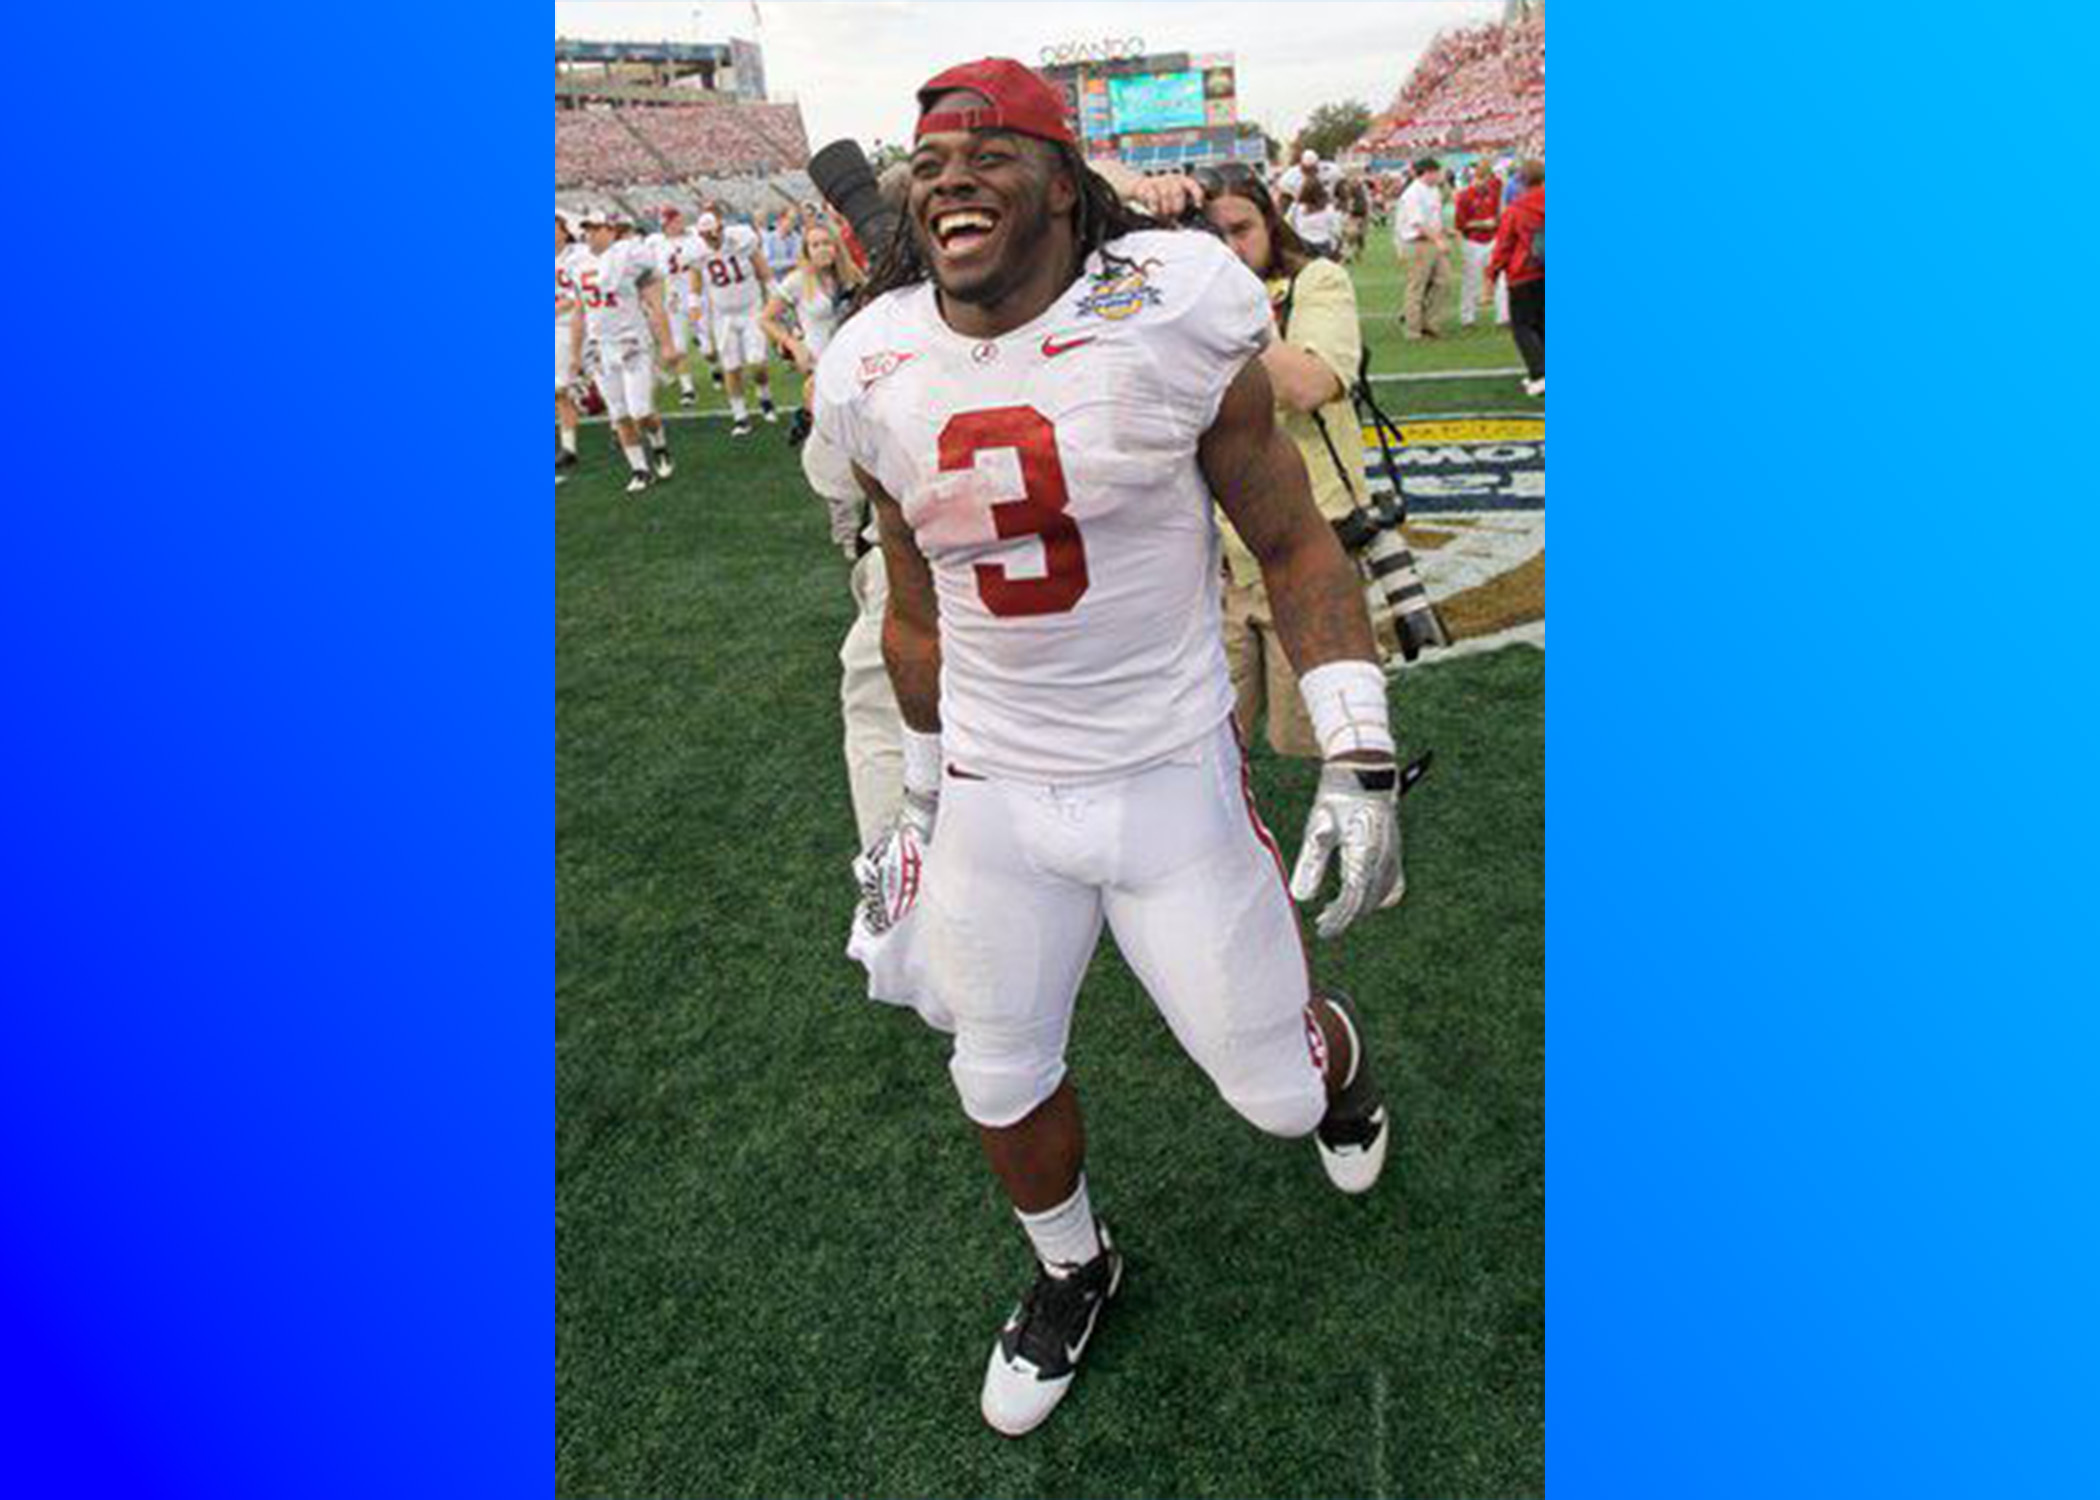 Former Alabama running back announced as speaker for Irondale's July luncheon